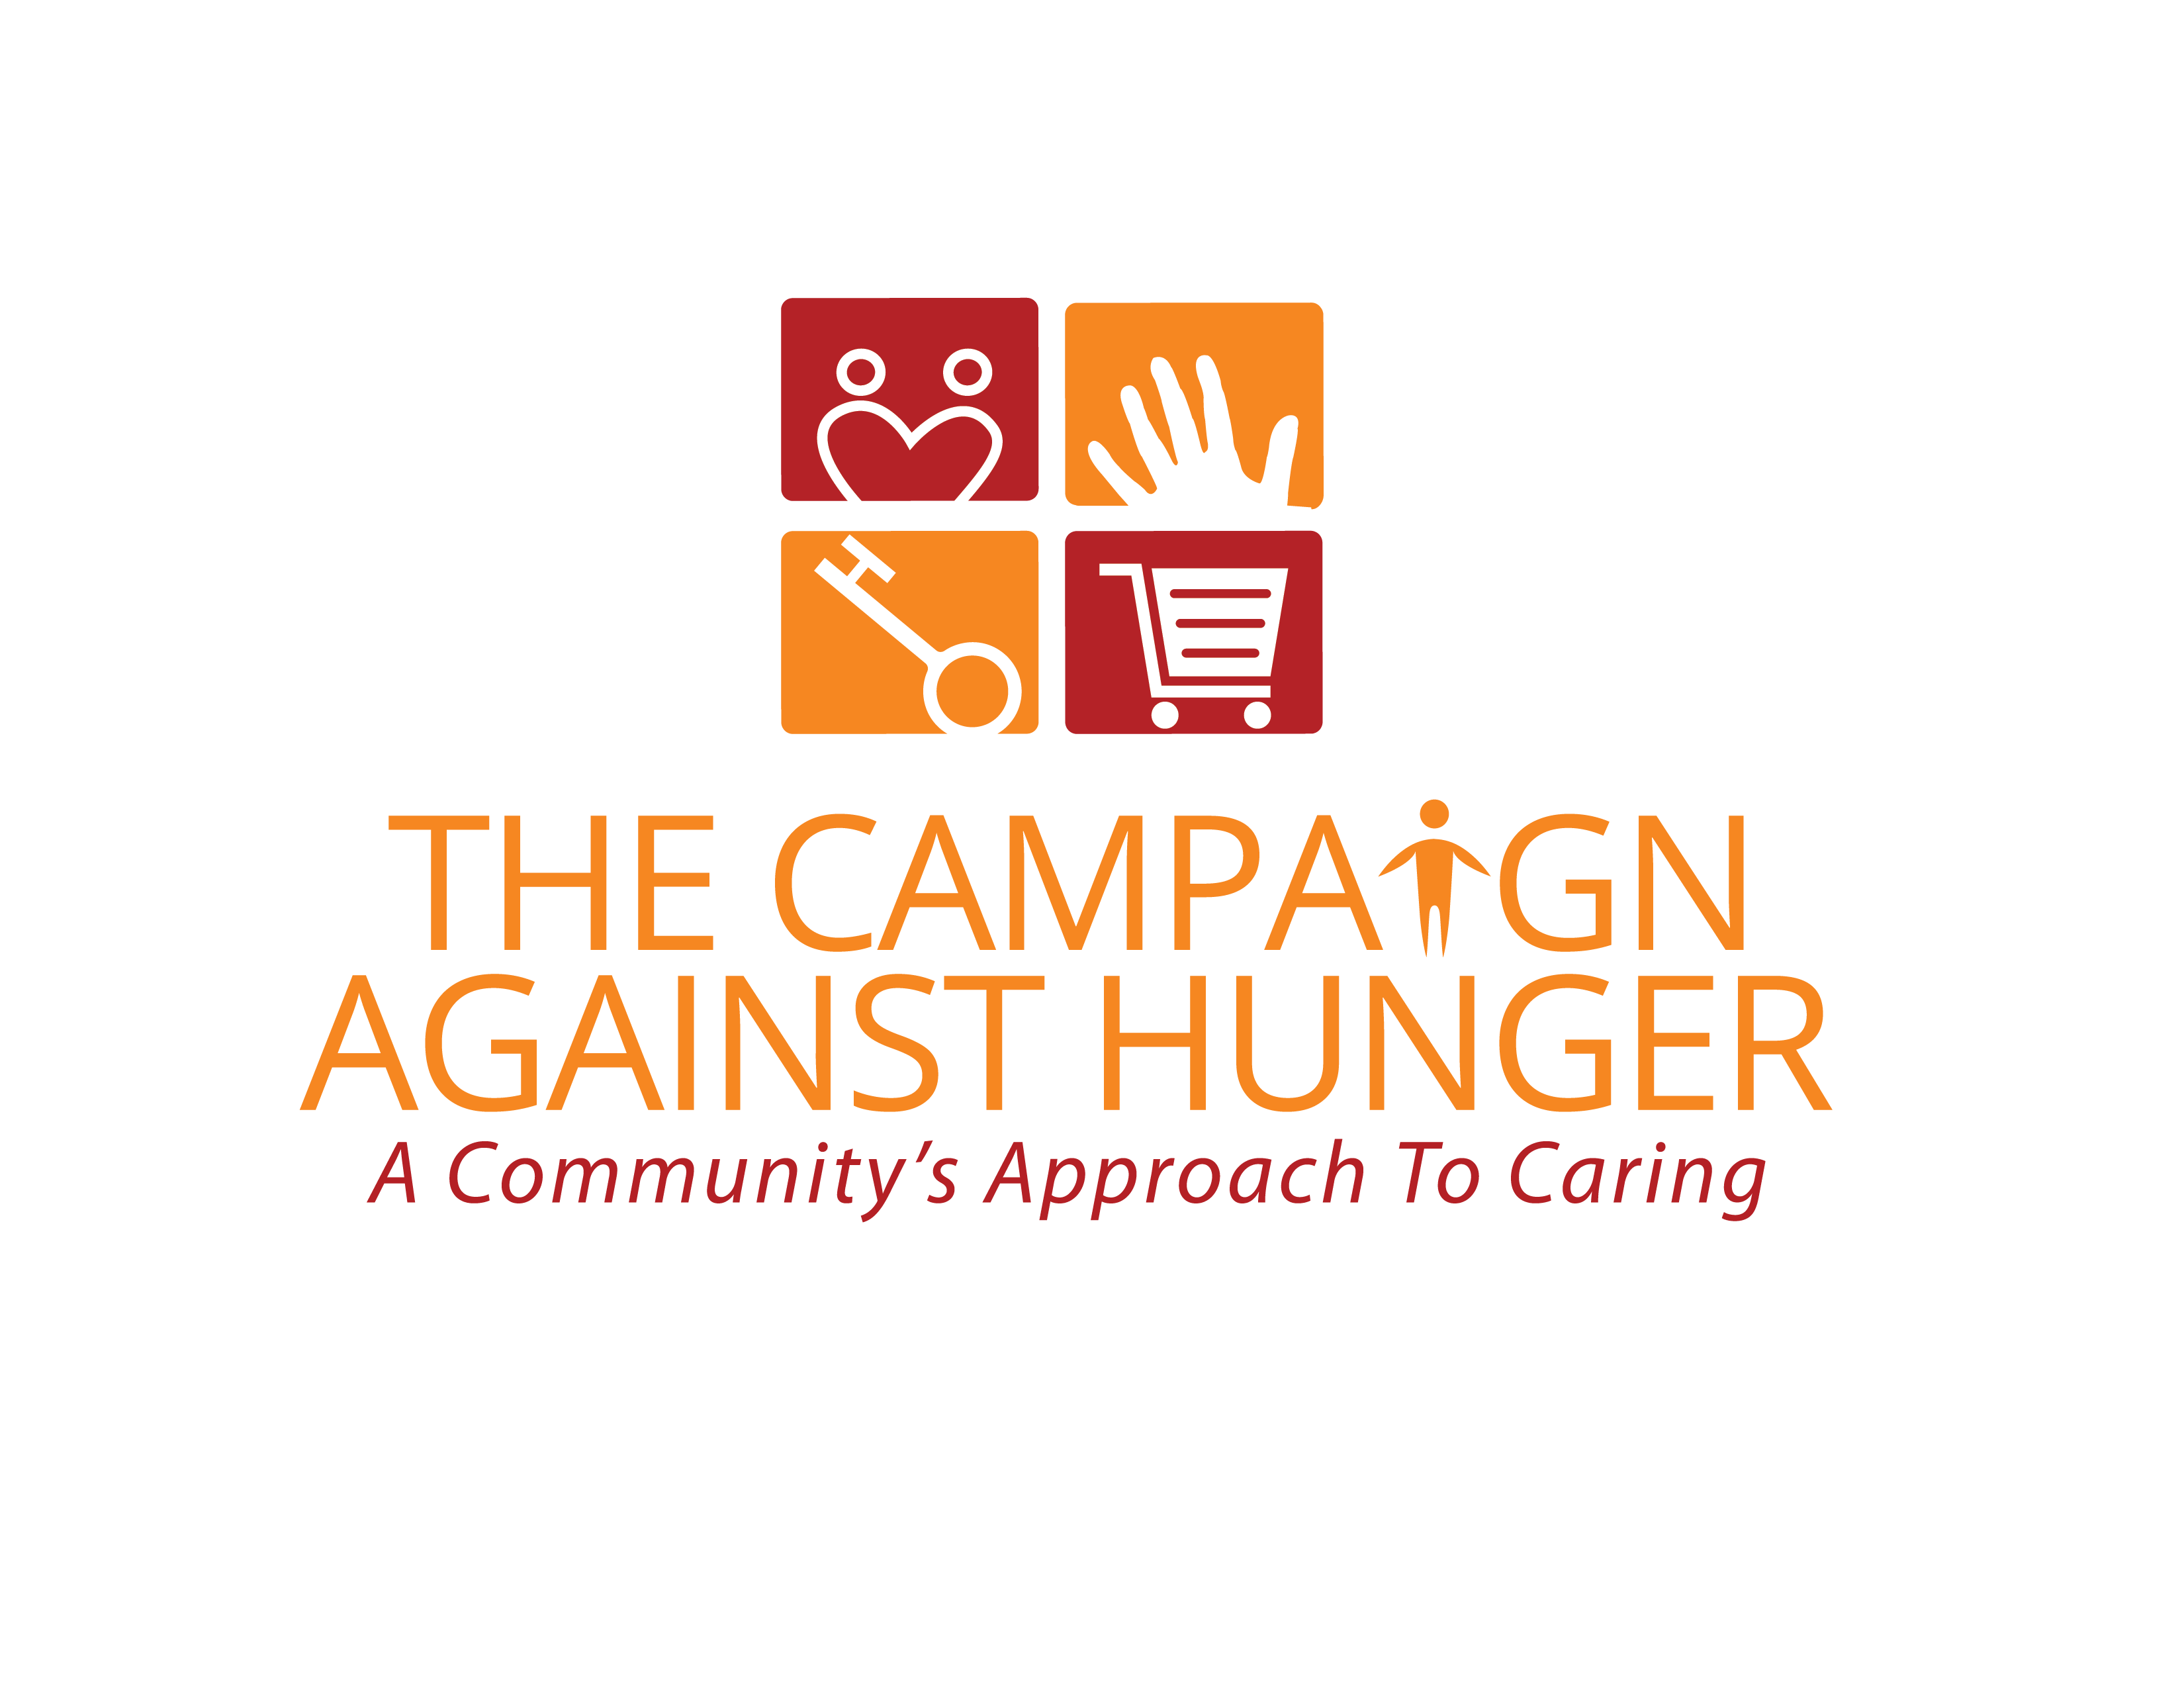 The Campaign Against Hunger